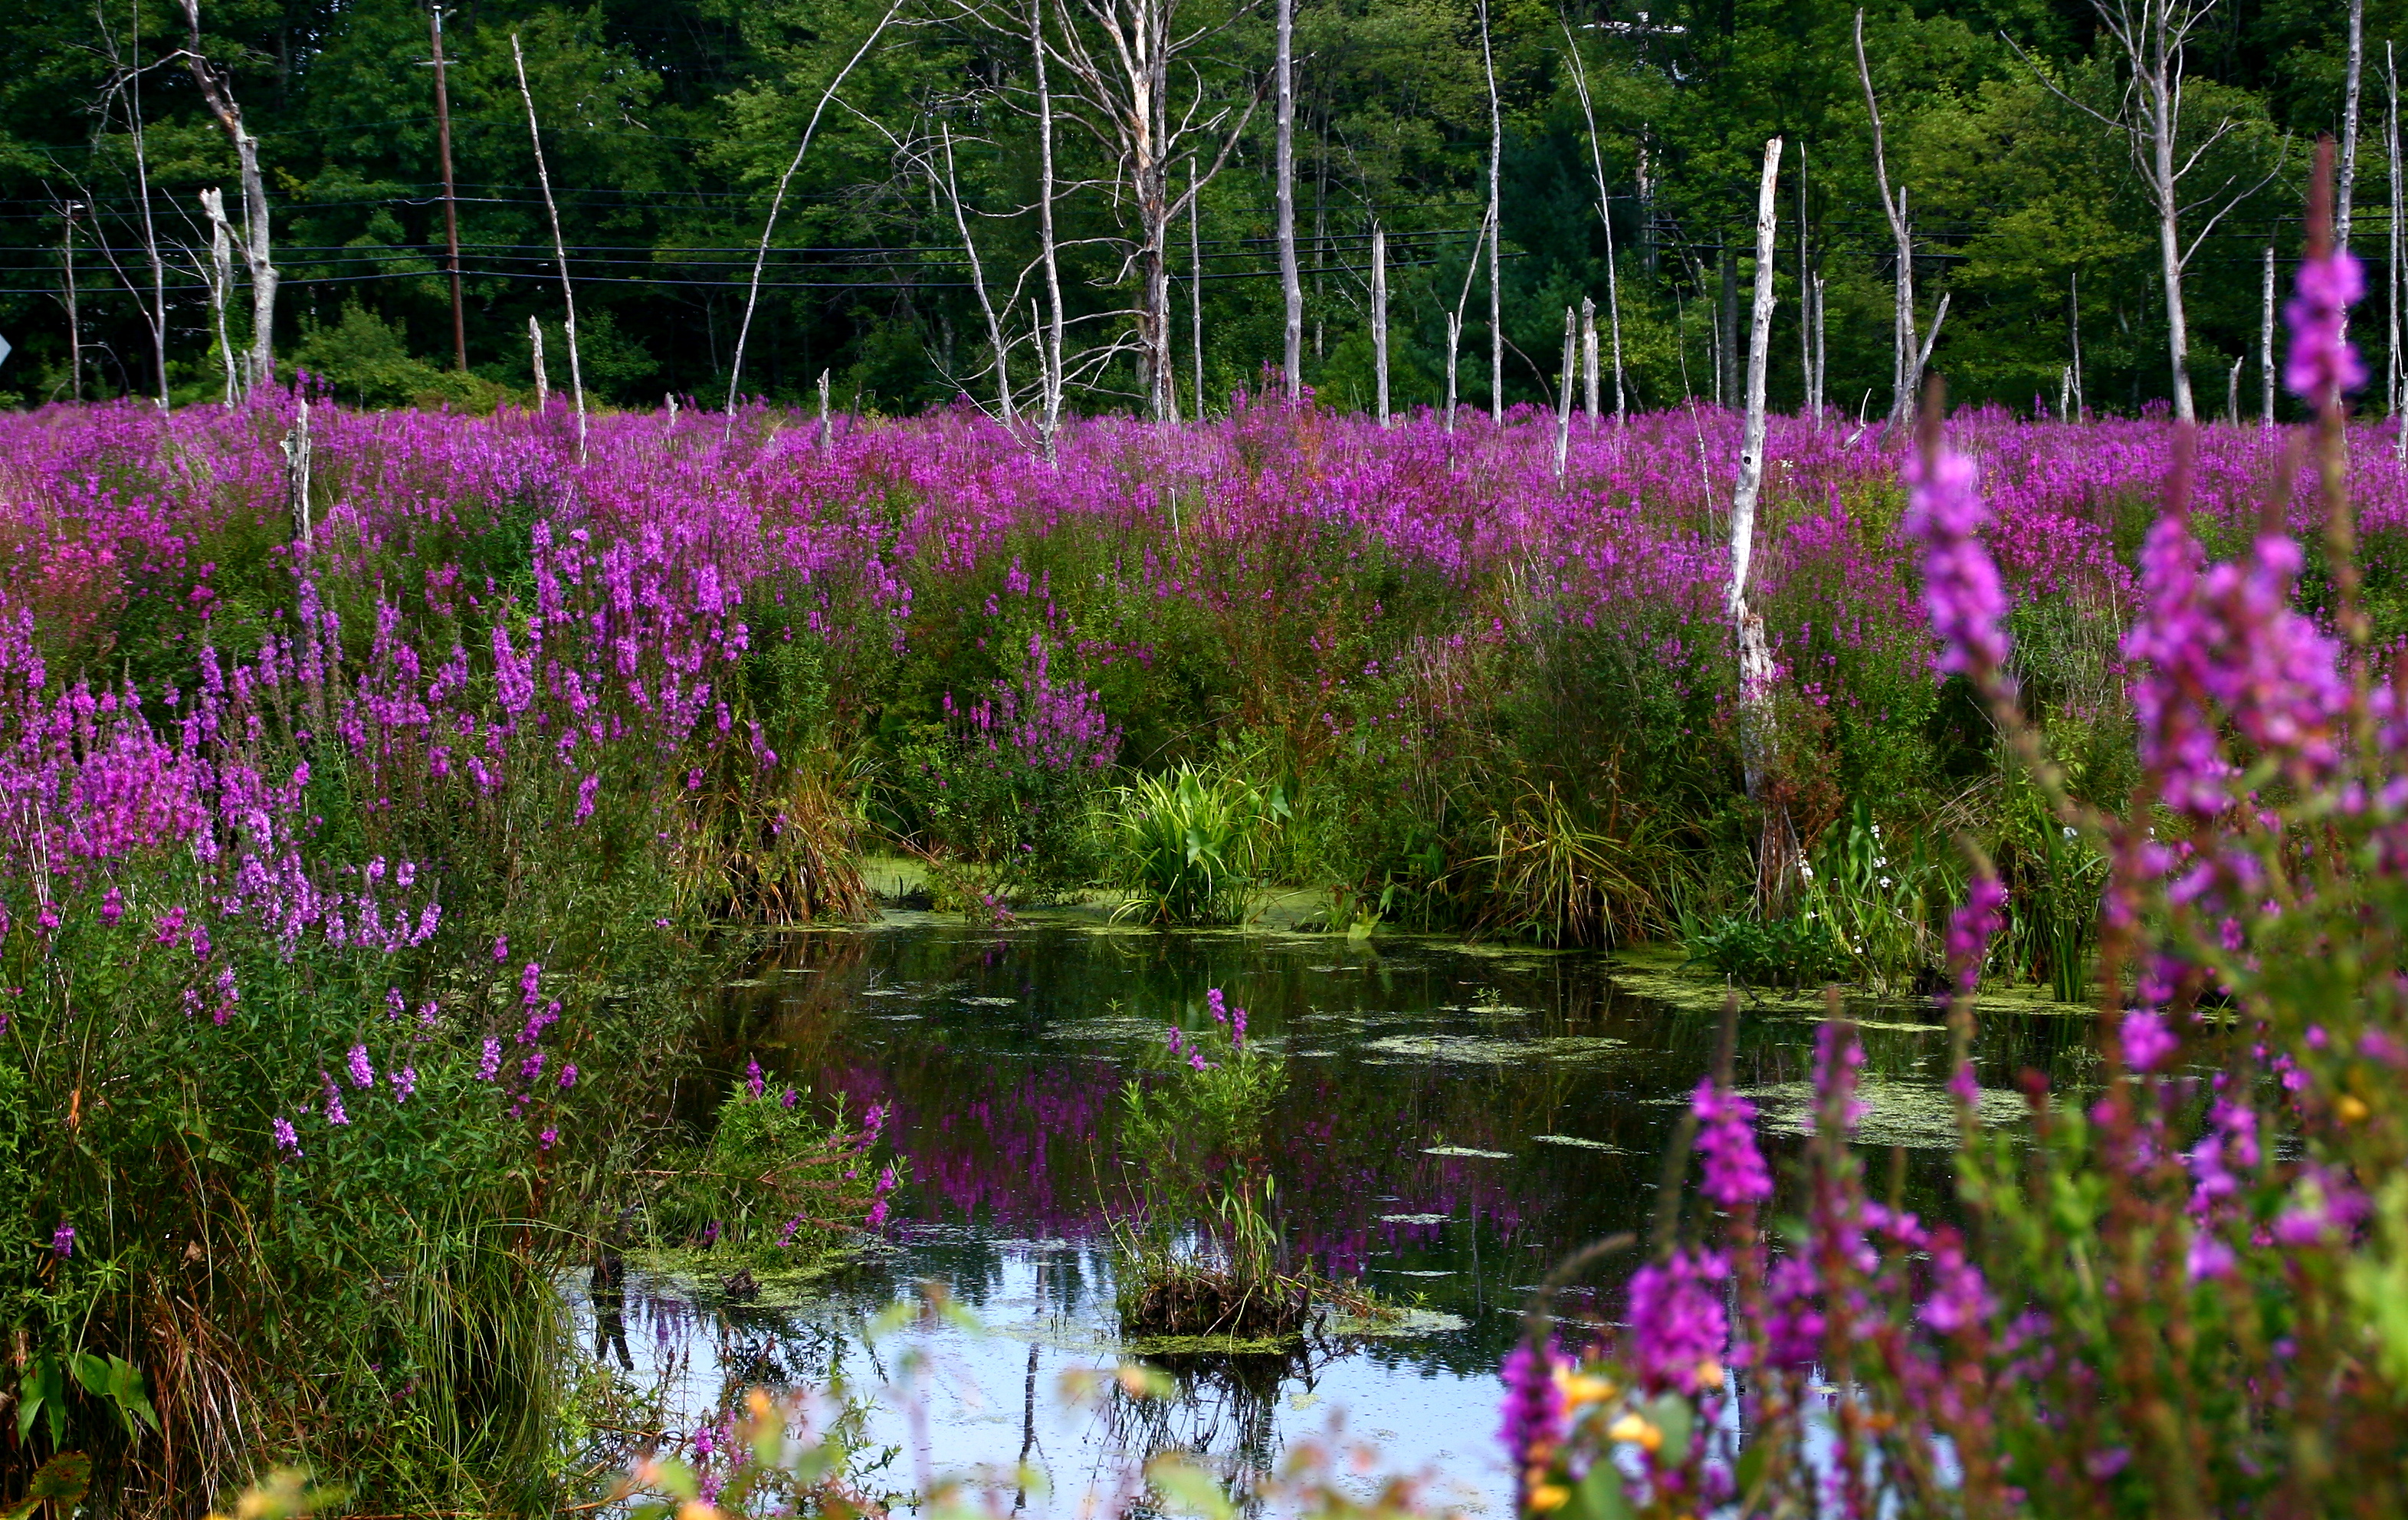 Purple Loosestrife, is an aggressive nonnative species that, while attractive, has wide spreading negative impacts on native plants and wildlife. 